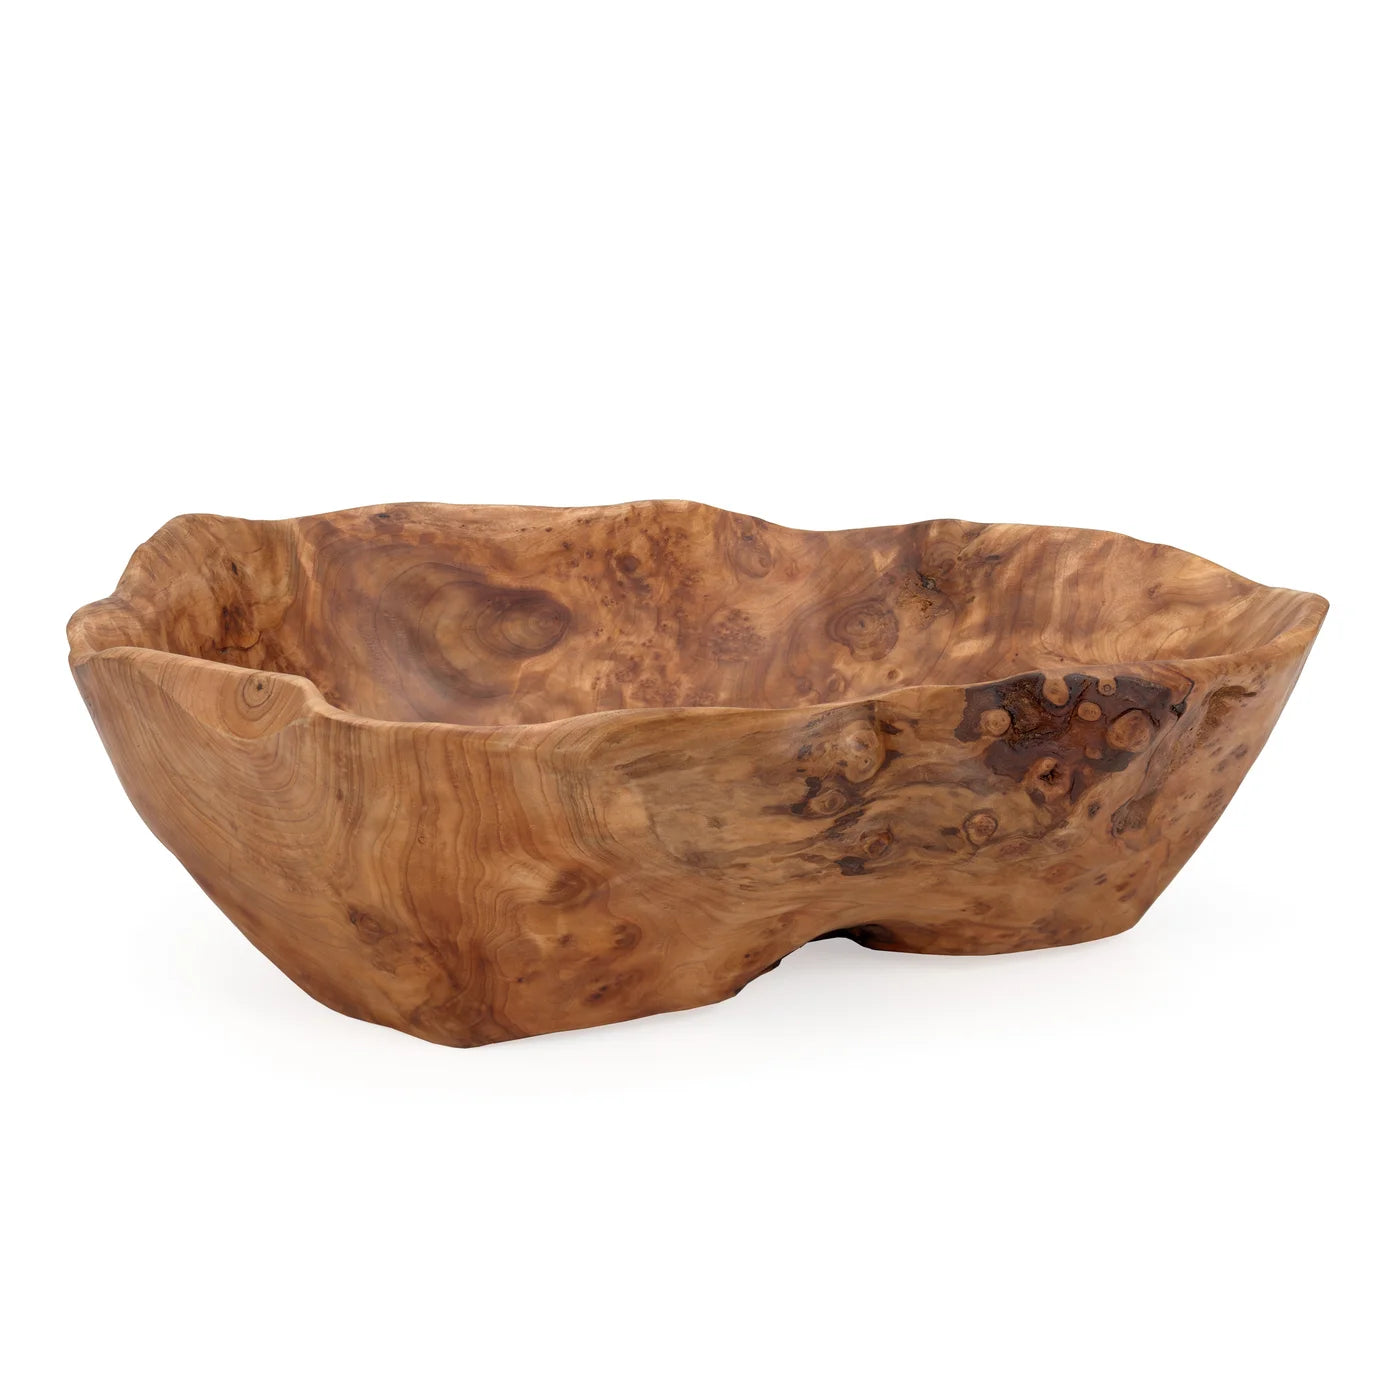 TORRE & TAGUS Costa Carved Bowl